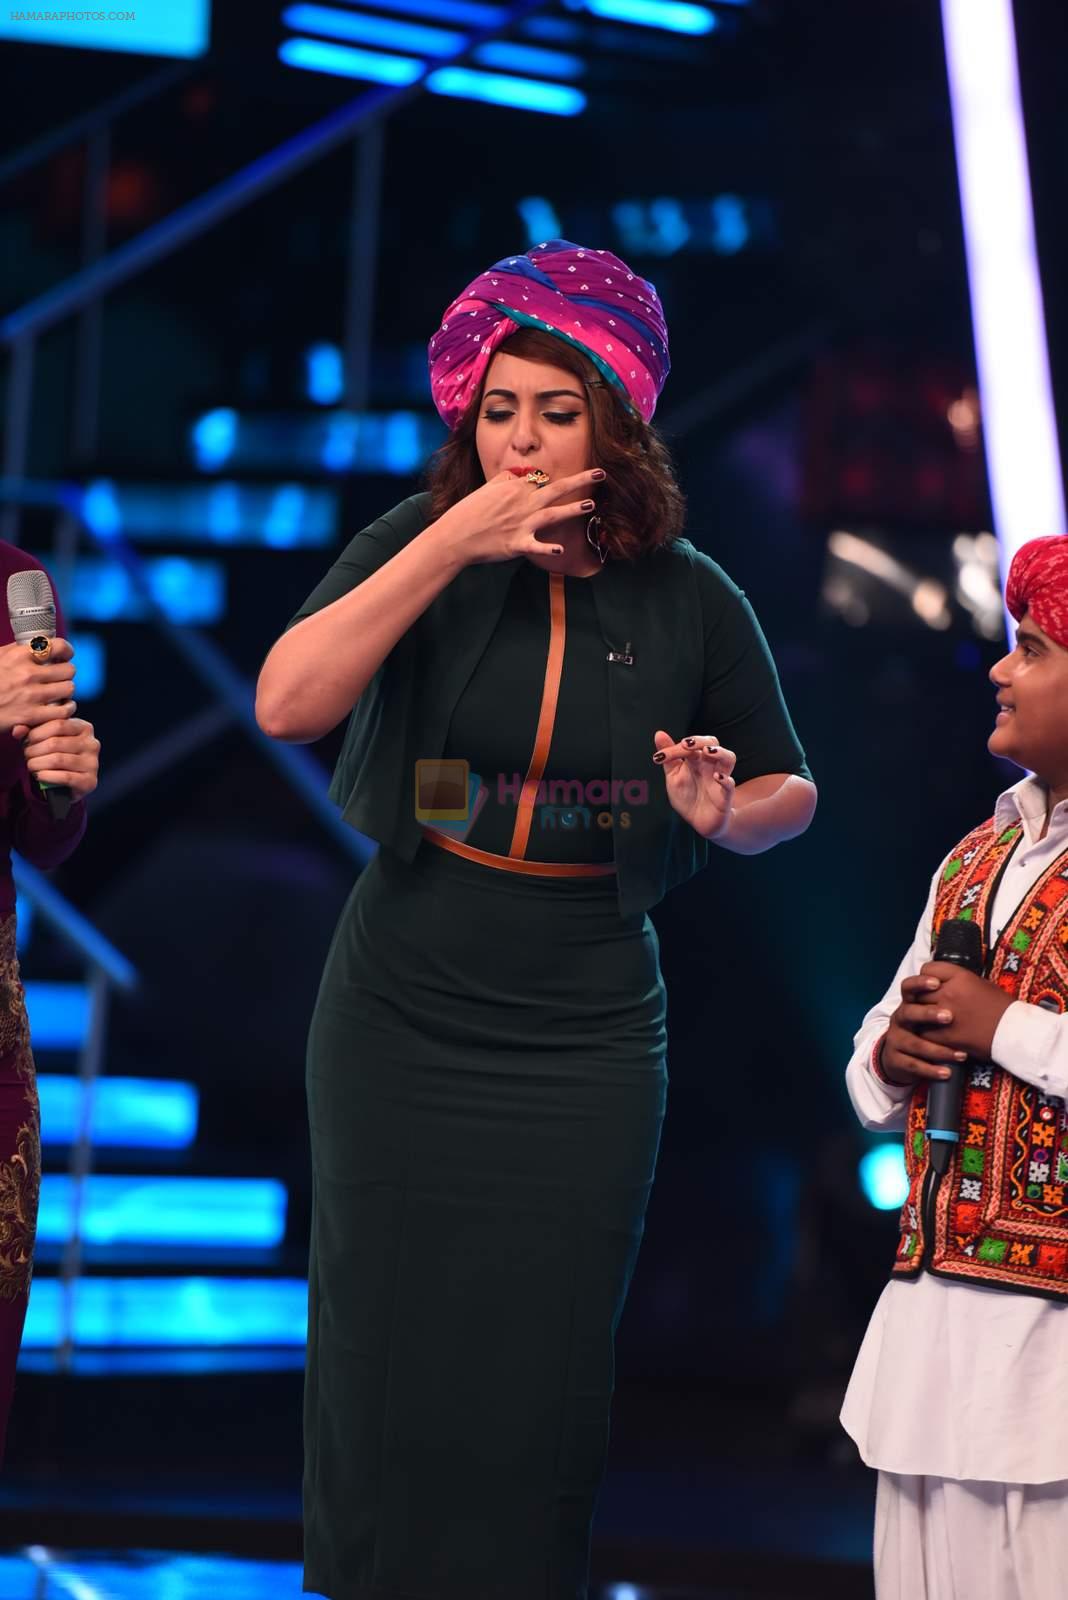 Sonakshi Sinha on the sets of Indian Idol Jr in Mumbai on 25th June 2015